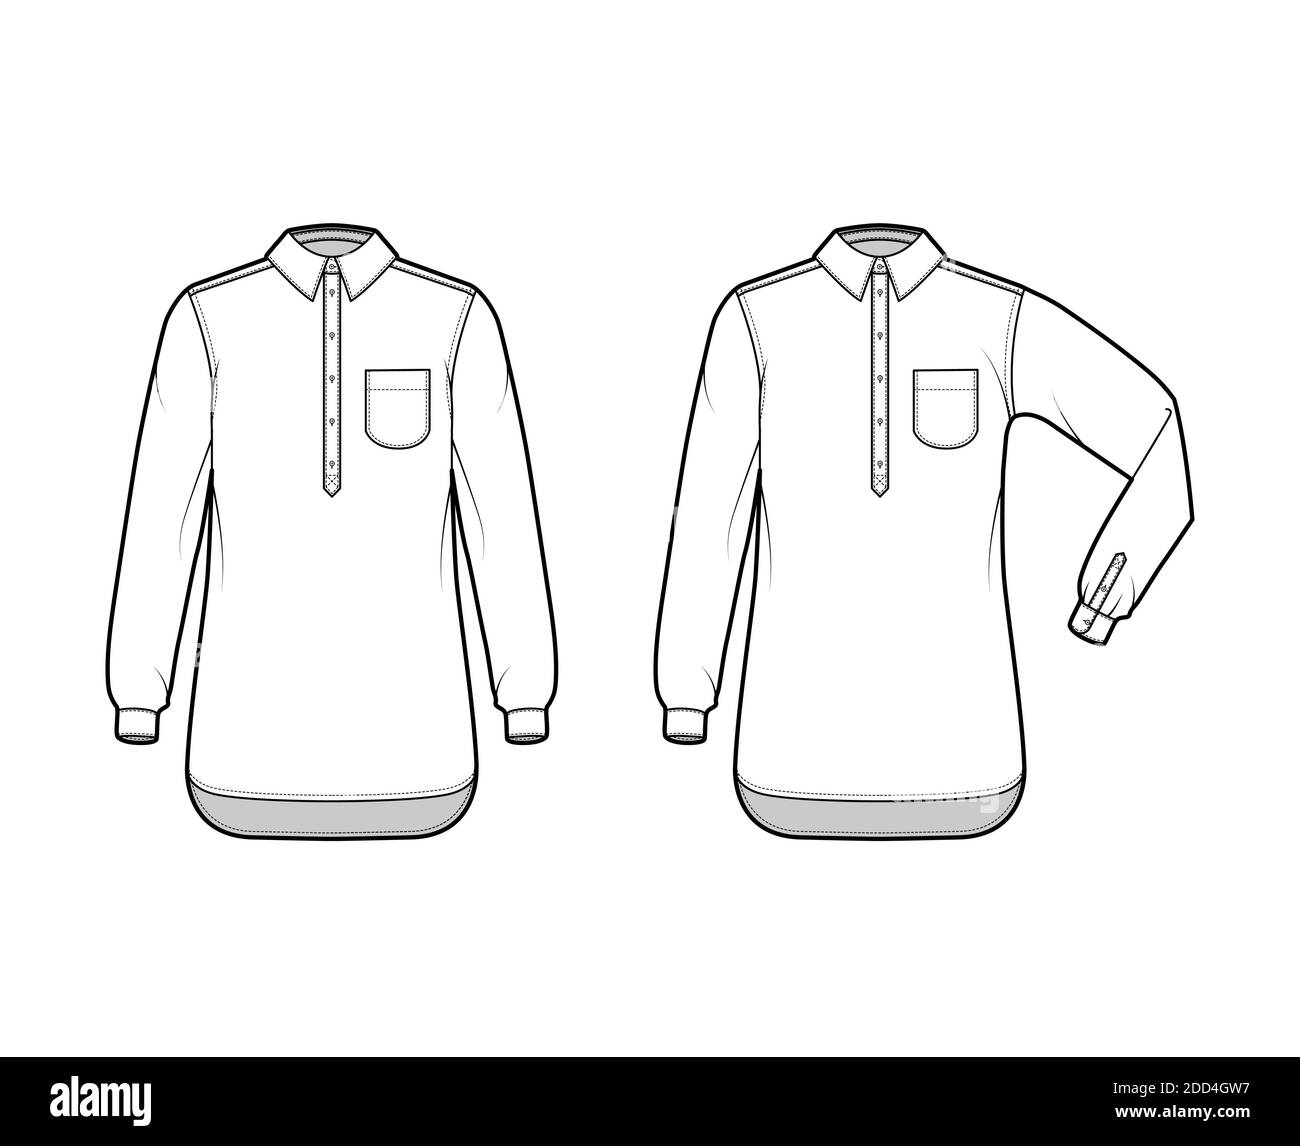 Set of Shirt pullover technical fashion illustration with rounded pocket, elbow fold long sleeve, oversized, half placket button down. Flat template front, white color. Women men unisex top CAD mockup Stock Vector